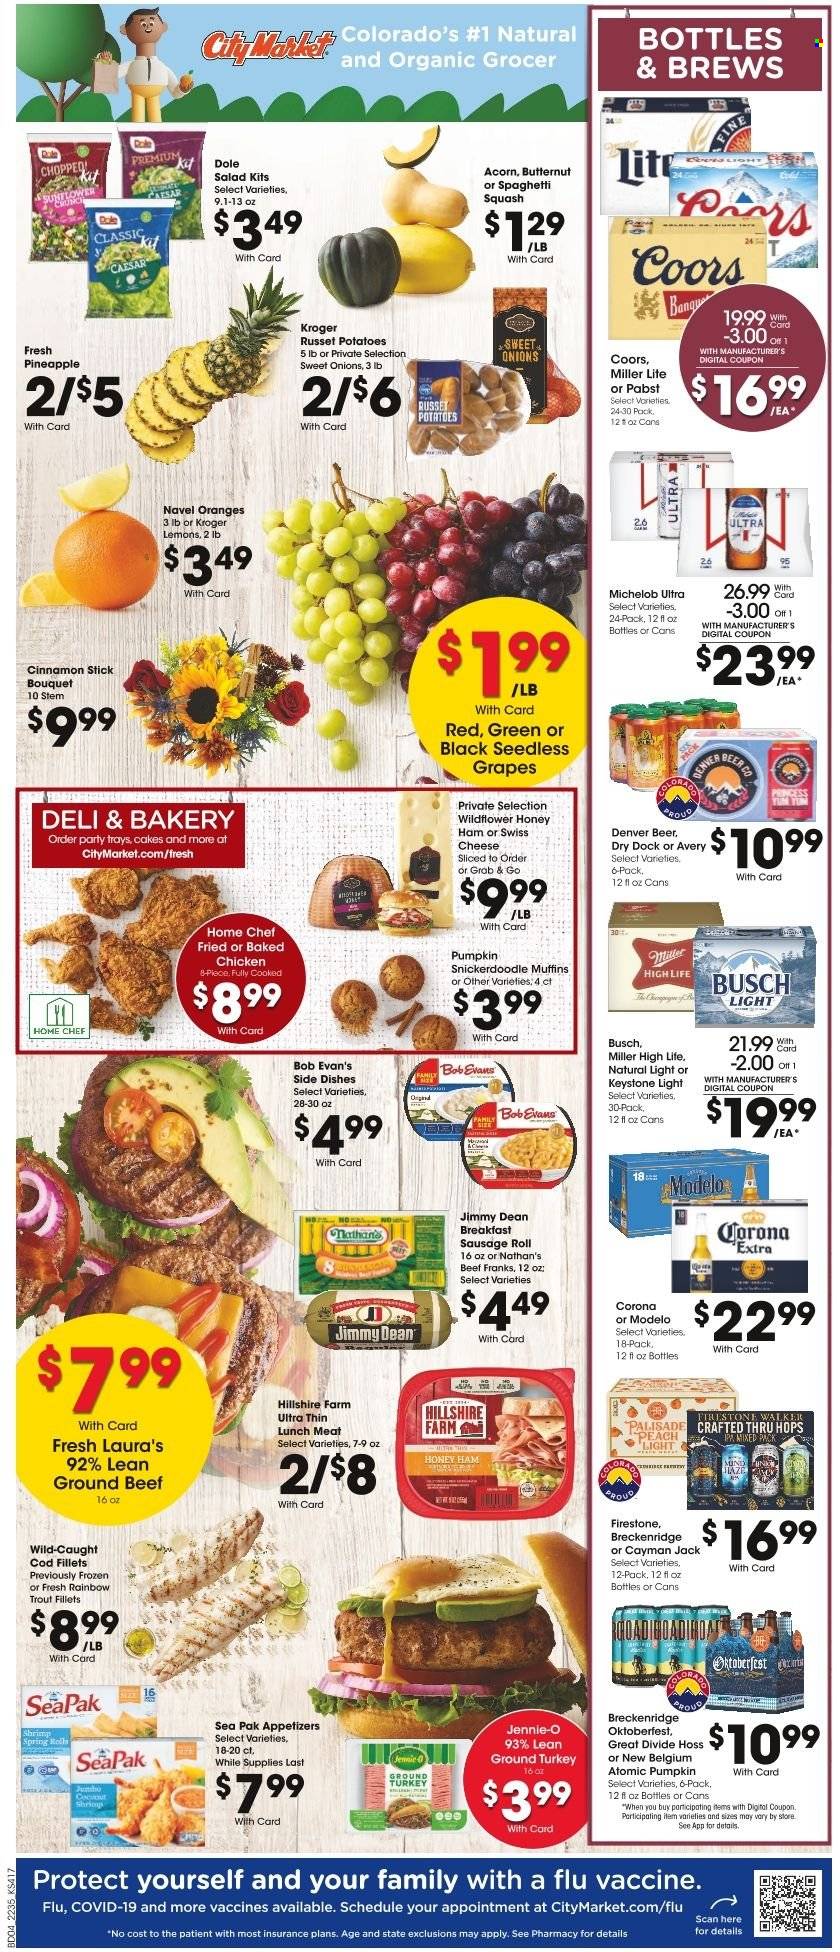 thumbnail - City Market Flyer - 09/28/2022 - 10/04/2022 - Sales products - sausage rolls, cake, muffin, russet potatoes, potatoes, pumpkin, salad, Dole, grapes, seedless grapes, pineapple, oranges, cod, trout, shrimps, Bob Evans, Jimmy Dean, ham, Hillshire Farm, sausage, lunch meat, swiss cheese, cheese, cinnamon, beer, Busch, Corona Extra, IPA, Keystone, Modelo, Firestone Walker, ground turkey, beef meat, ground beef, bouquet, Firestone, butternut squash, Miller Lite, Coors, Michelob, lemons, navel oranges. Page 5.